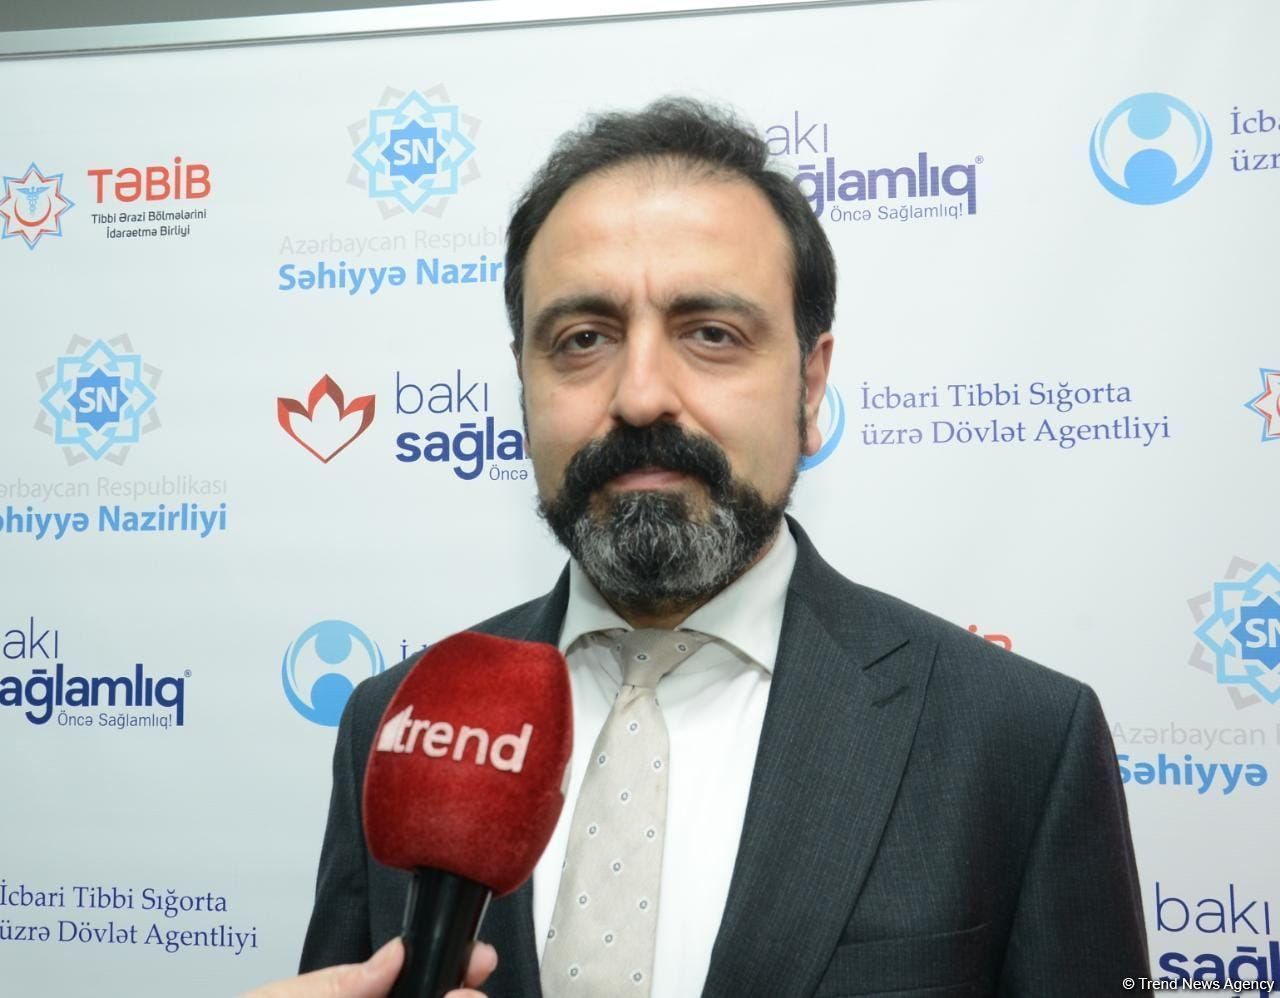 TURKOVAC vaccine for COVID-19 can be produced in Azerbaijan - Turkish Health Ministry